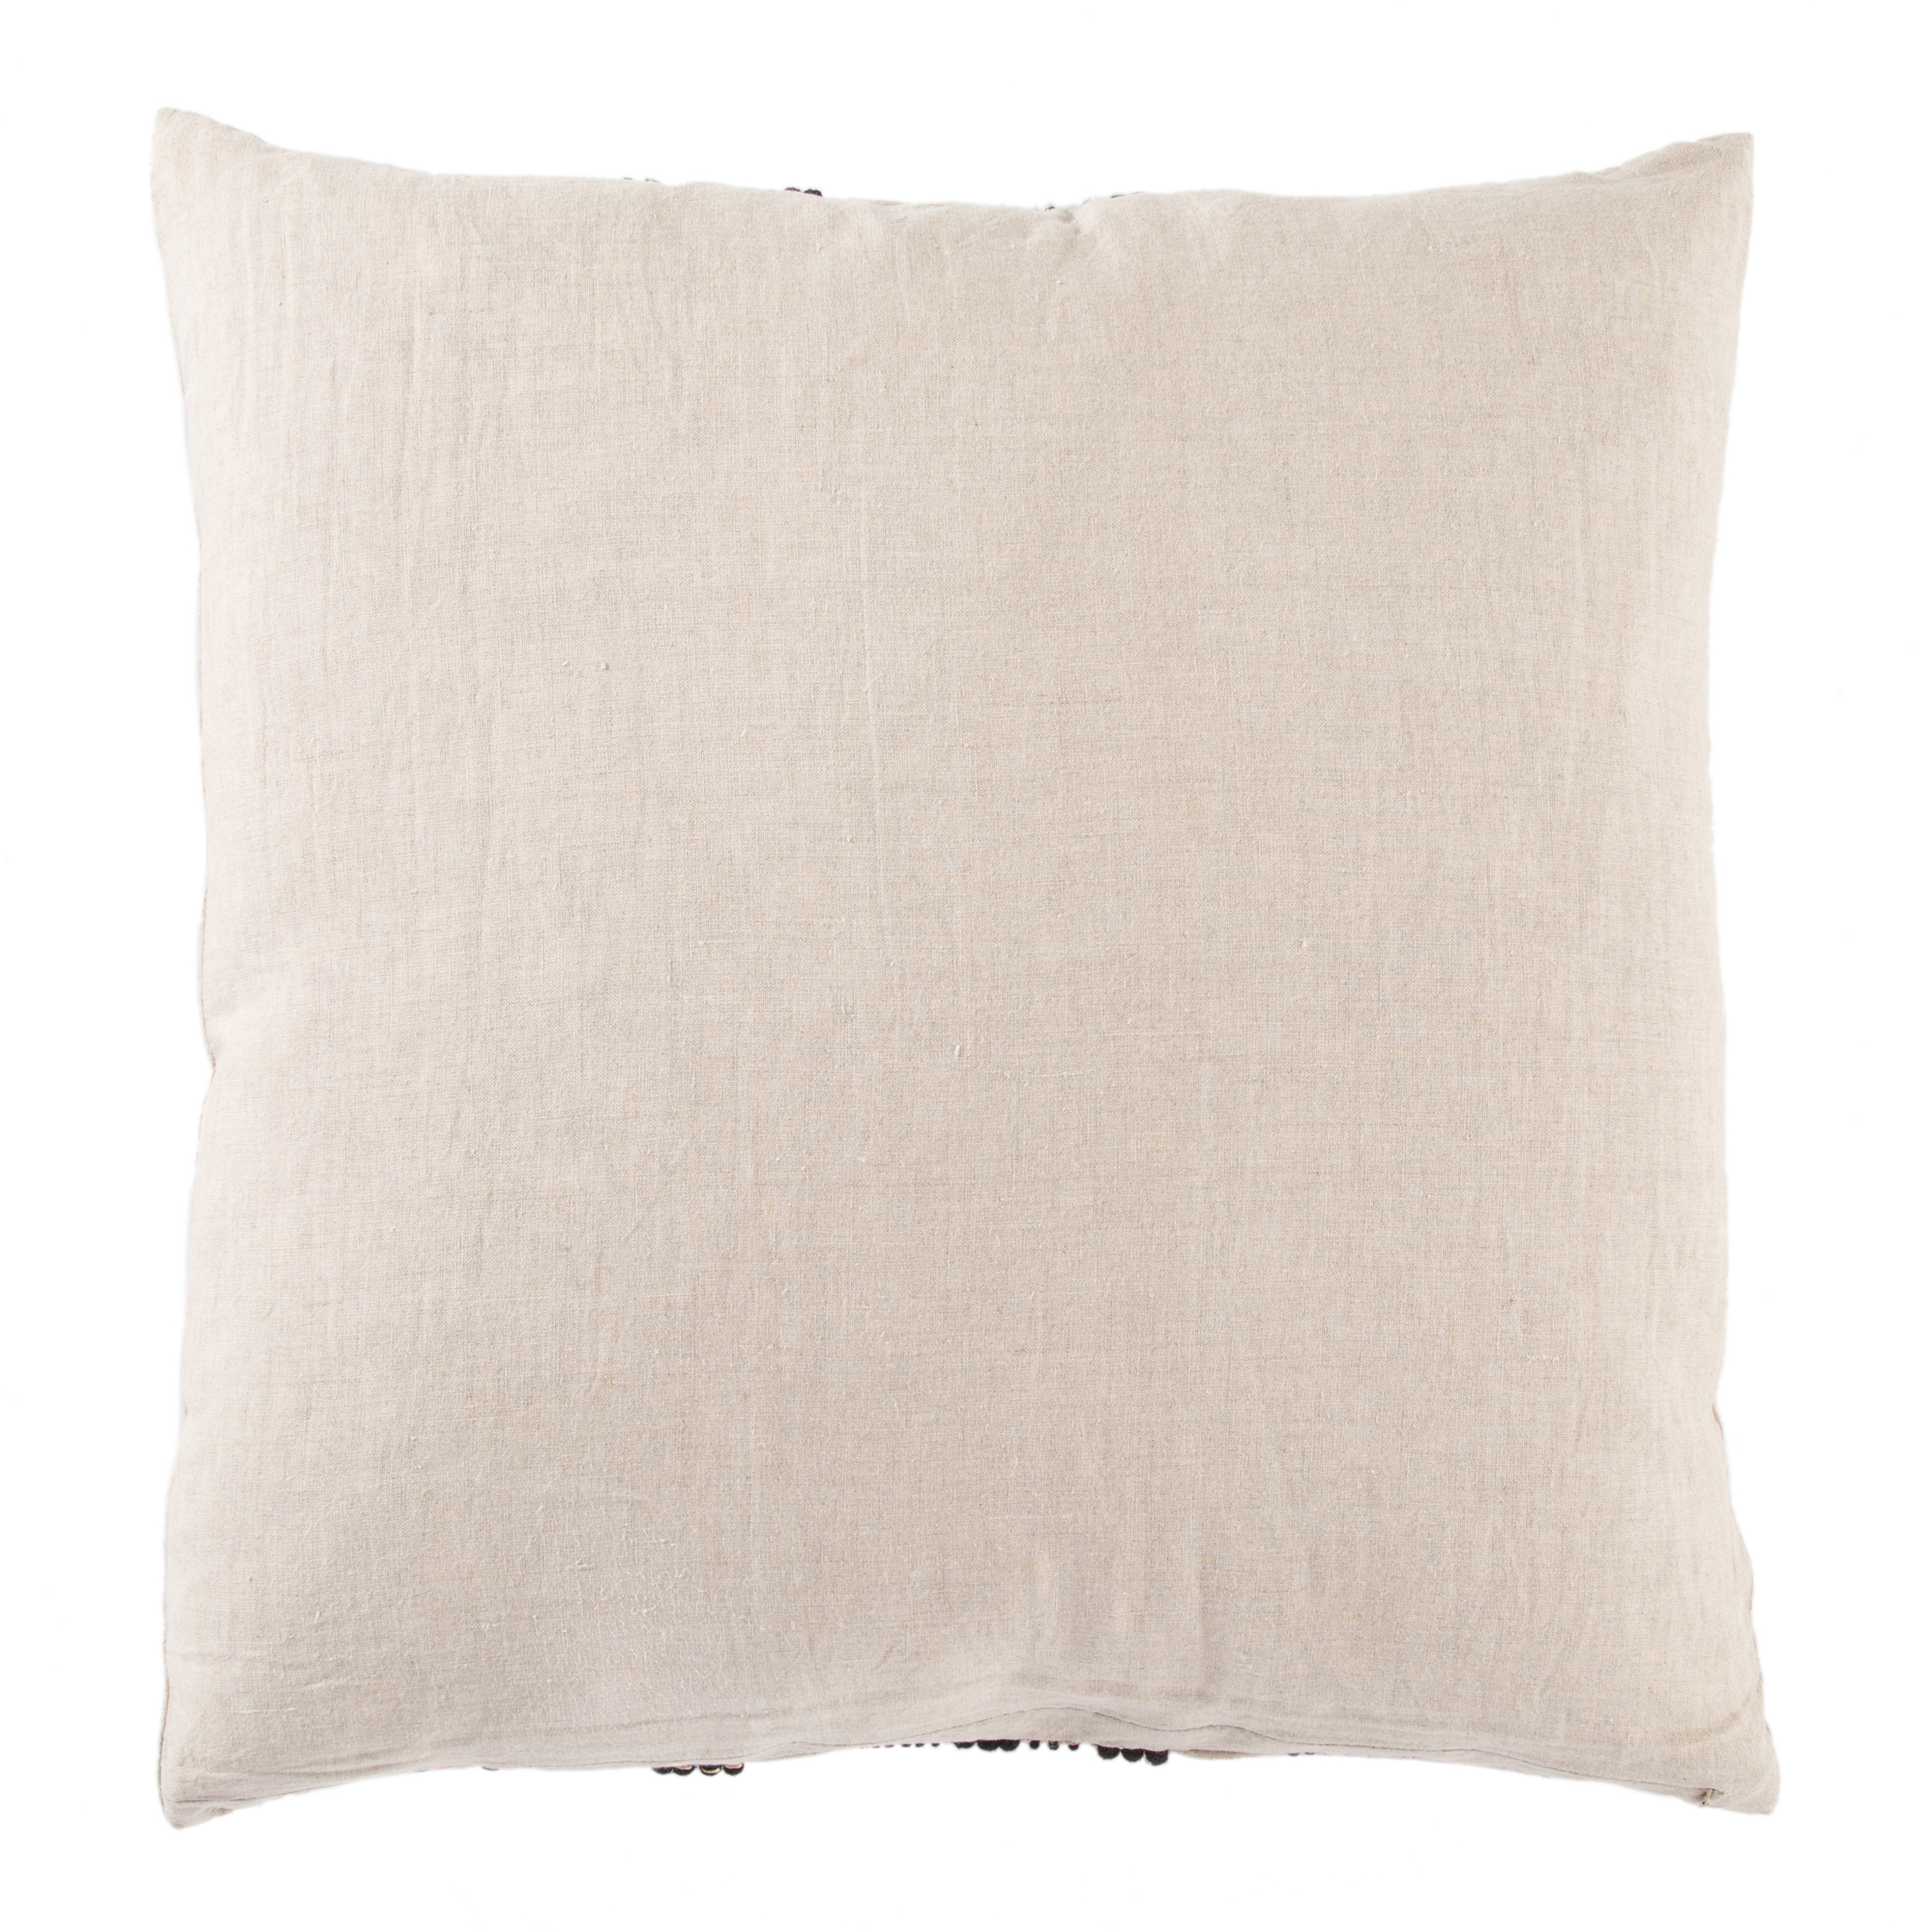 CNK31 Design (US) Cream 22"X22" Pillow with Poly Insert - Image 1